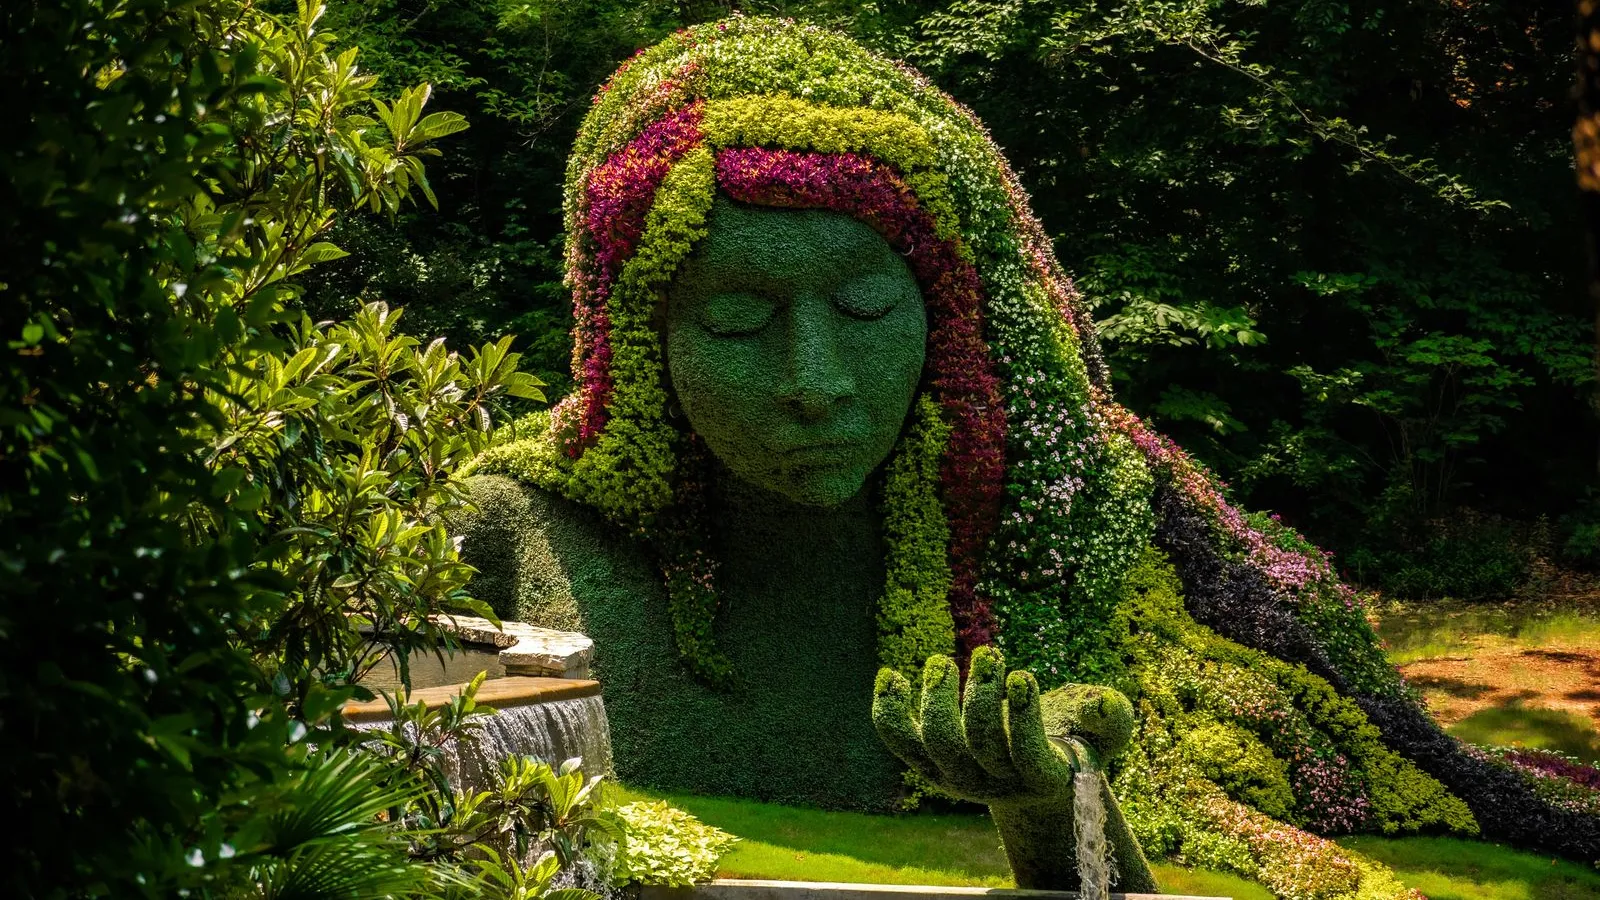 a statue of a person with a green headdress